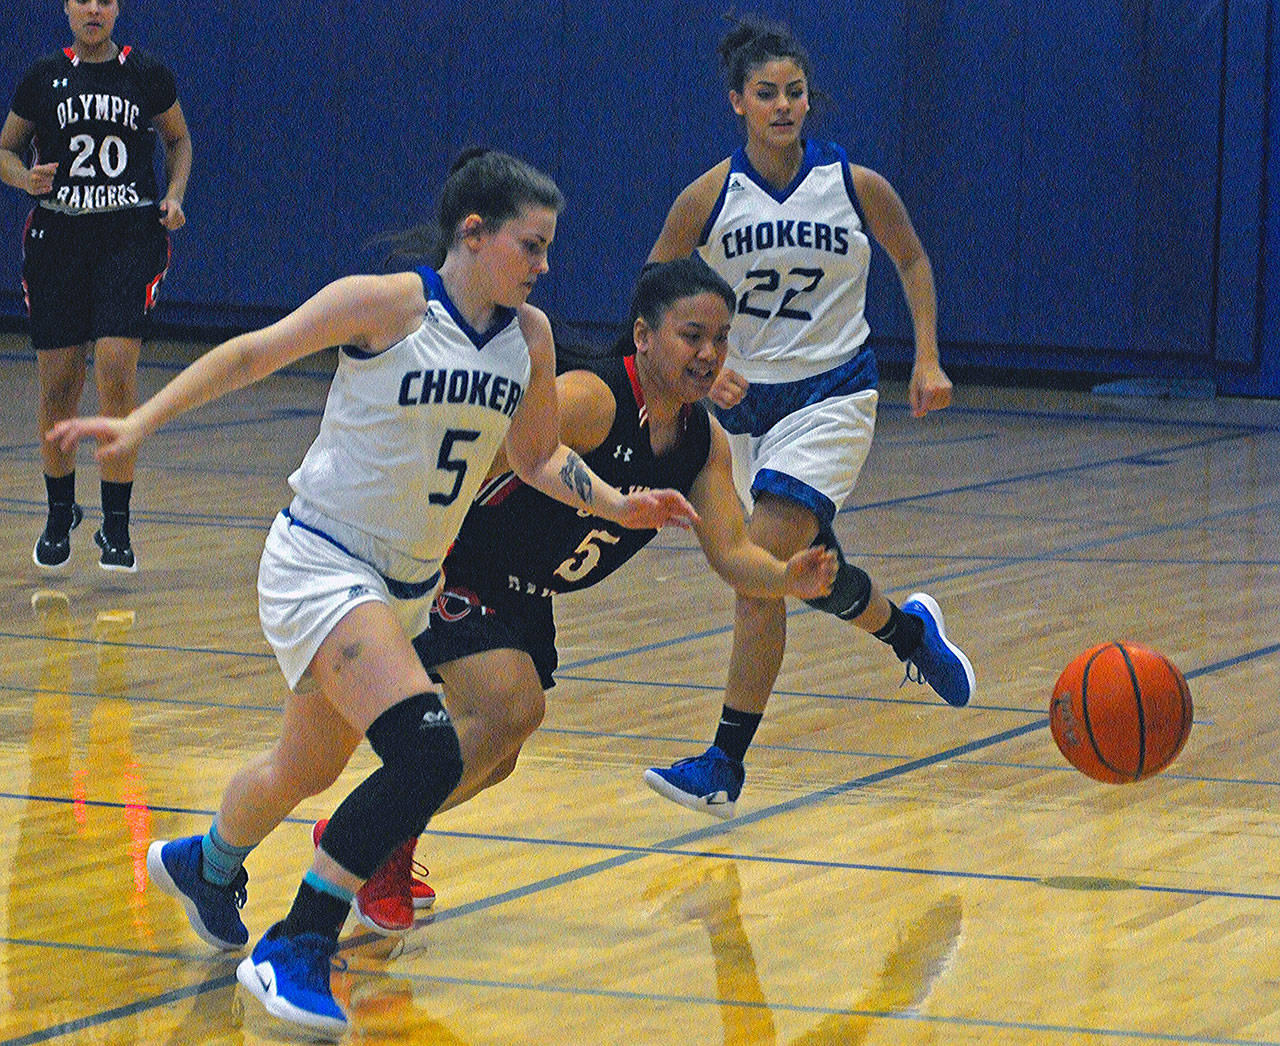 Grays Harbor’s Keeley Teel chases down a loose ball in a game against Olympic on Satuday. Teel led the team with five steals. (Hasani Grayson | Grays Harbor News Group)